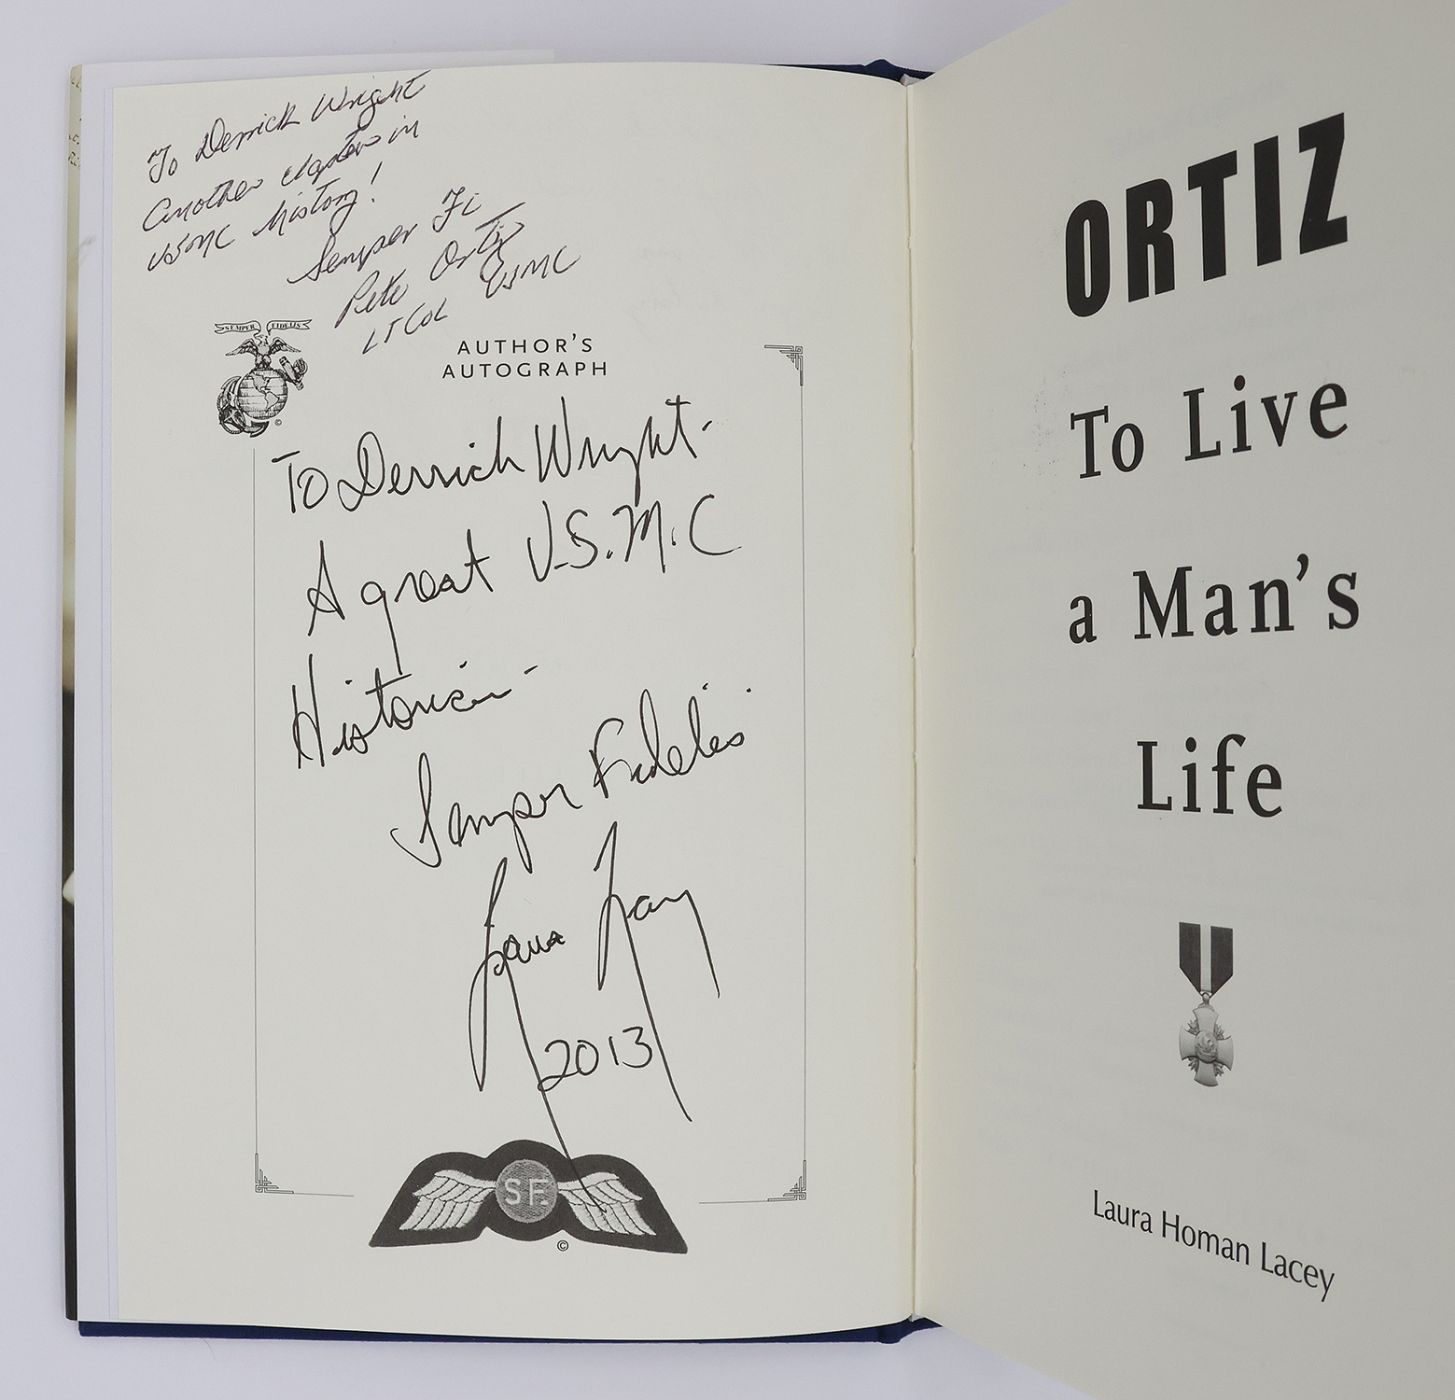 ORTIZ: TO LIVE A MAN'S LIFE -  image 3